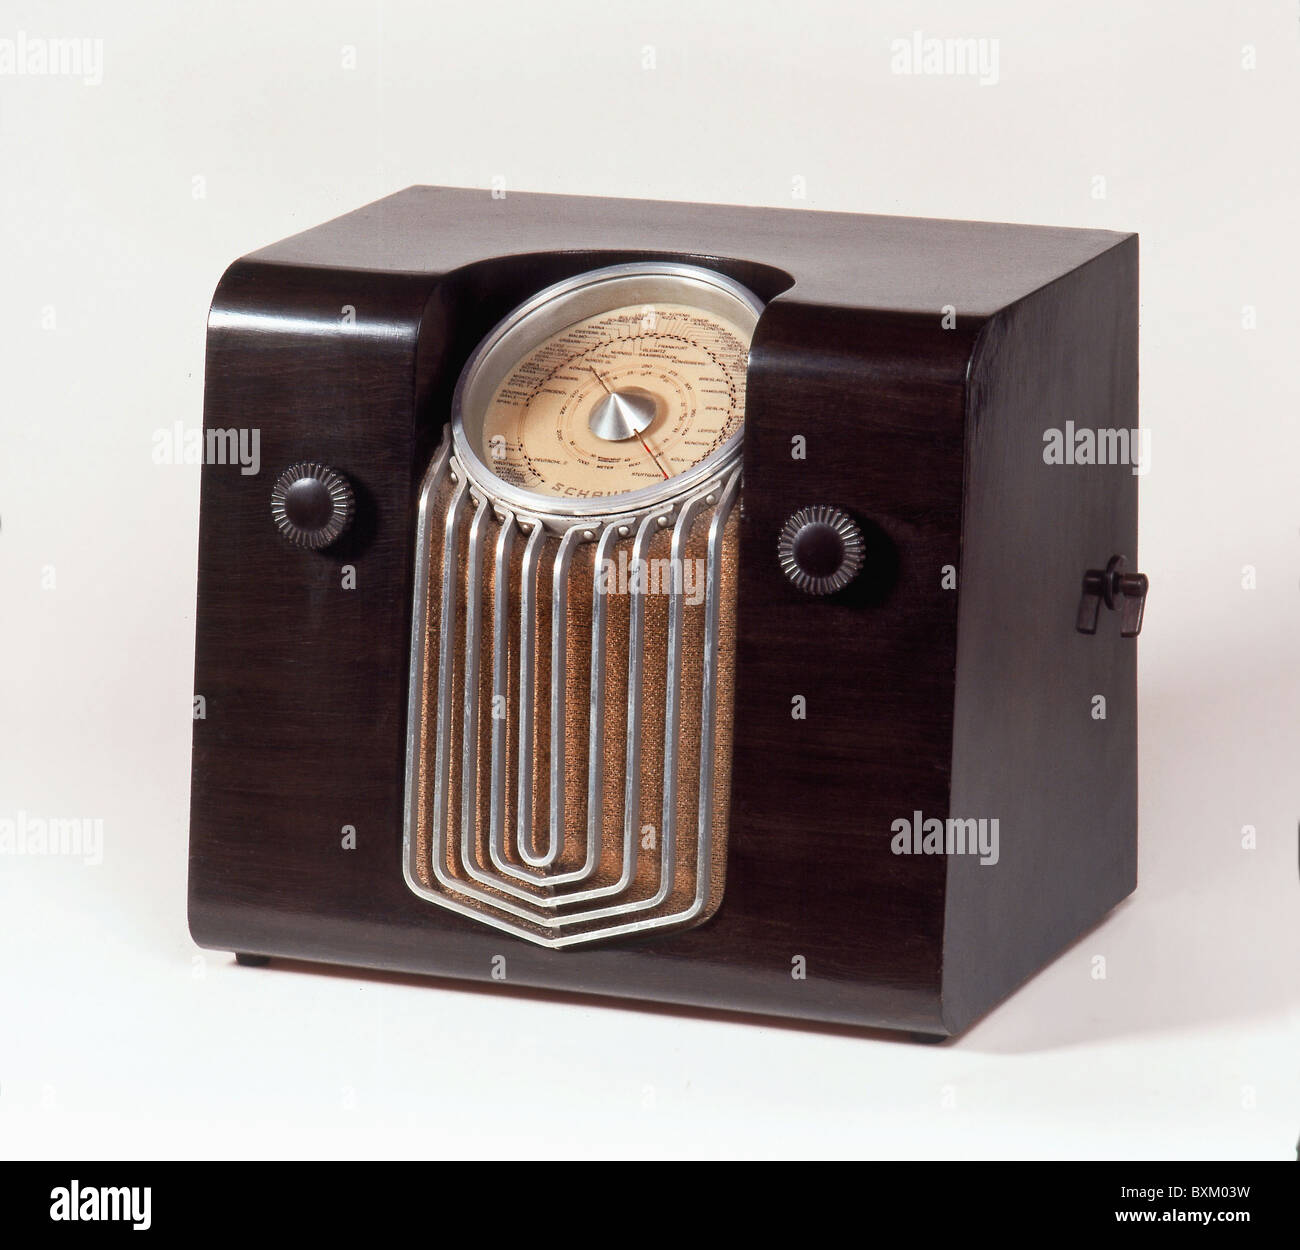 broadcast, radio, radio set Schaub Super 229/II WKW, Germany, 1937,  Additional-Rights-Clearences-Not Available Stock Photo - Alamy